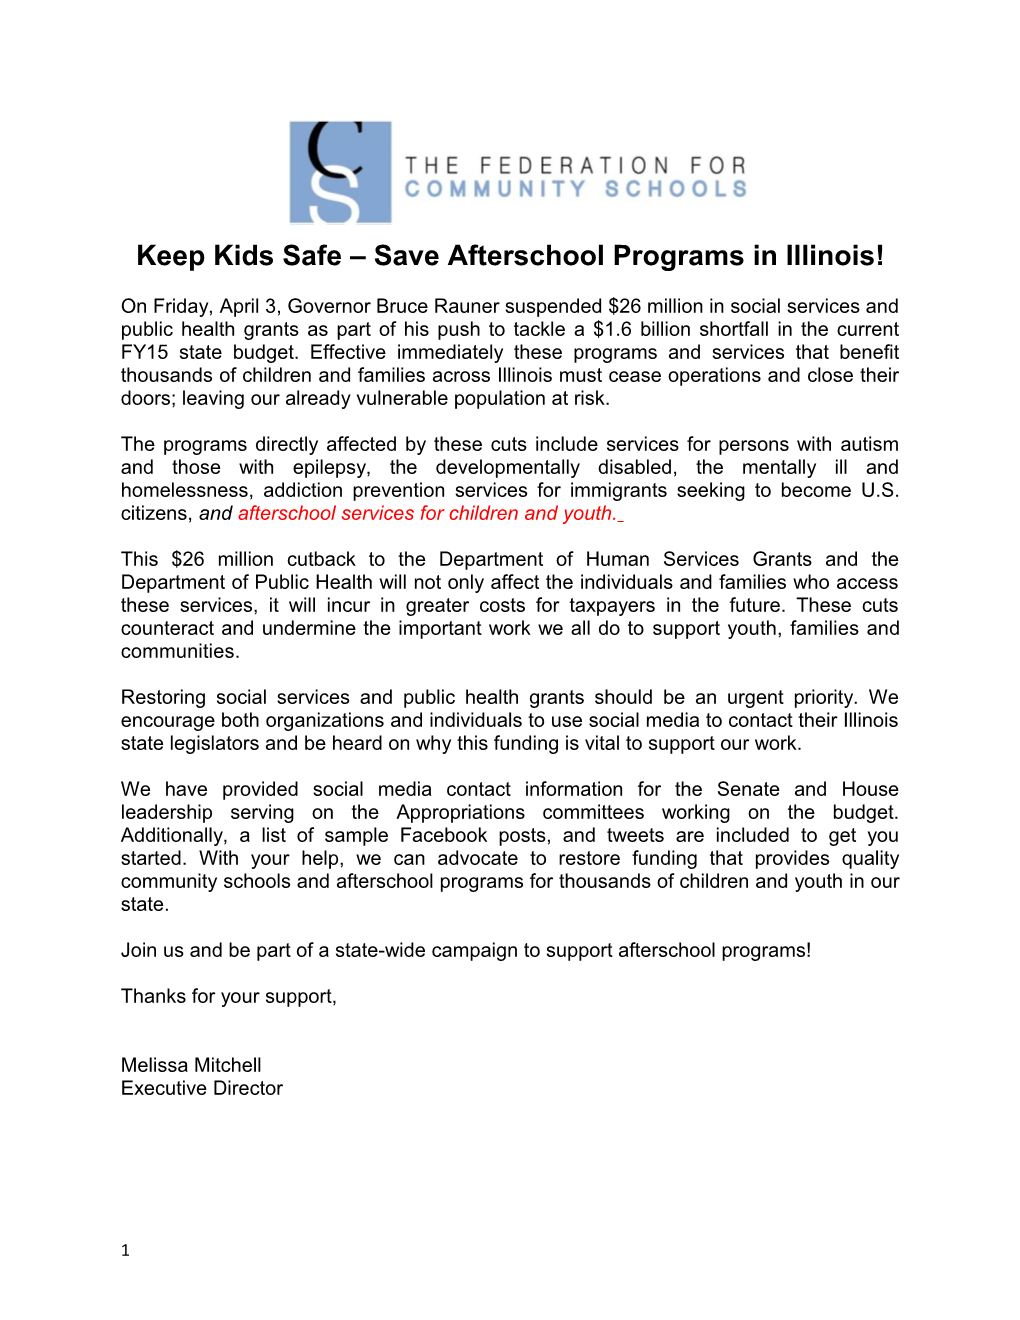 Keep Kids Safe Save Afterschool Programs in Illinois!